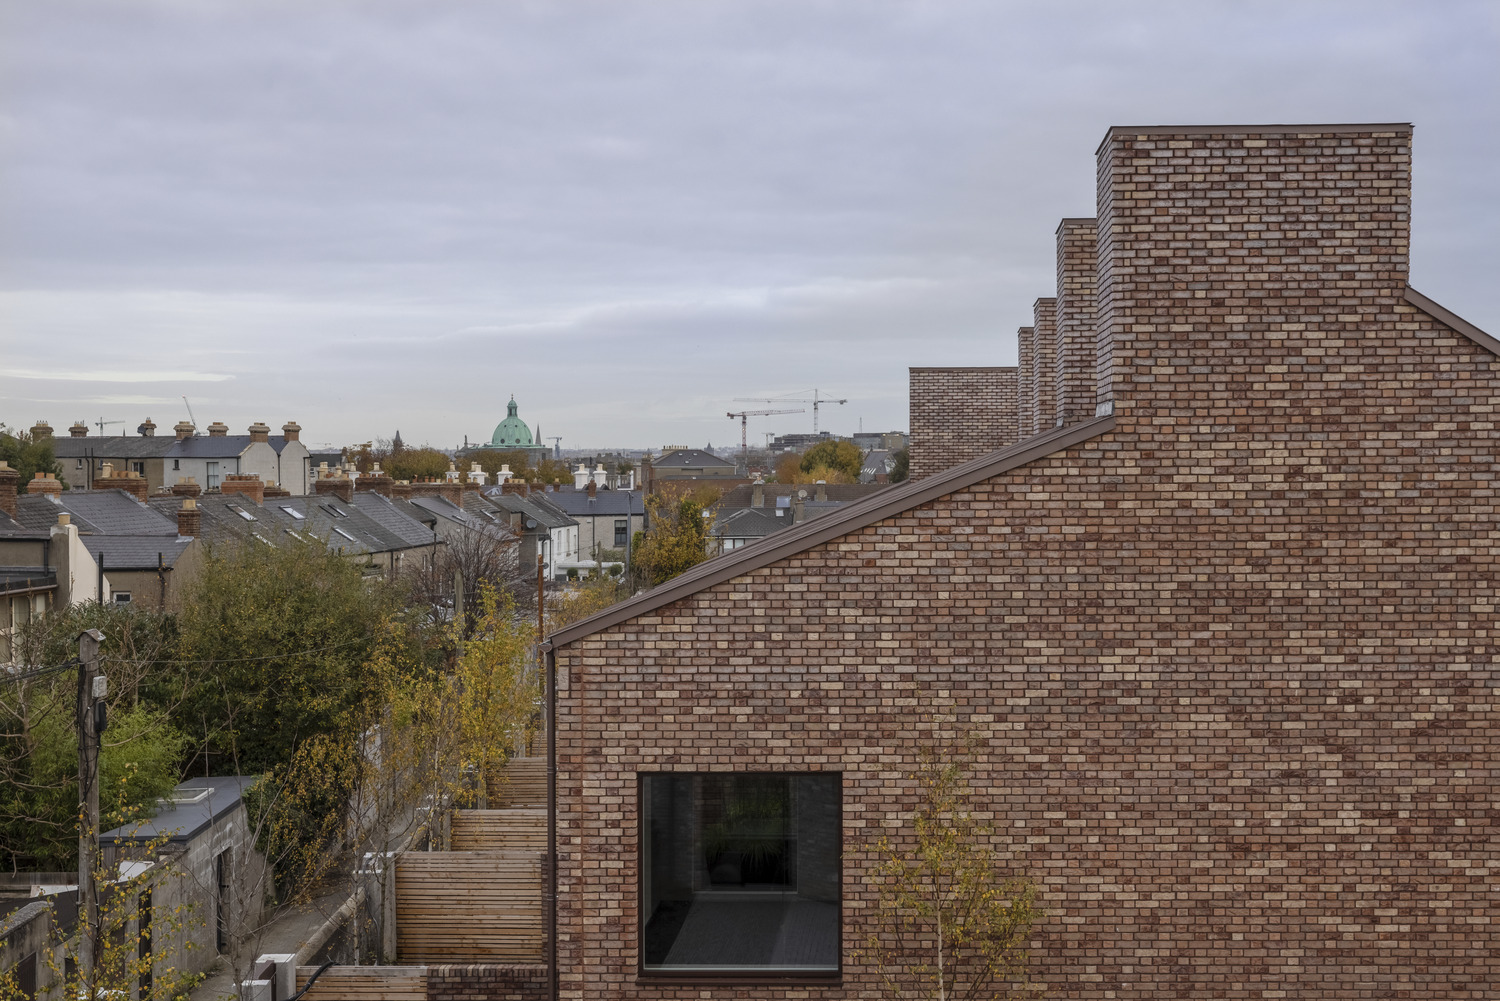 The gable end of a terrace. The done of Rathmines chruch can be seen in the distance, contextulising the sites location